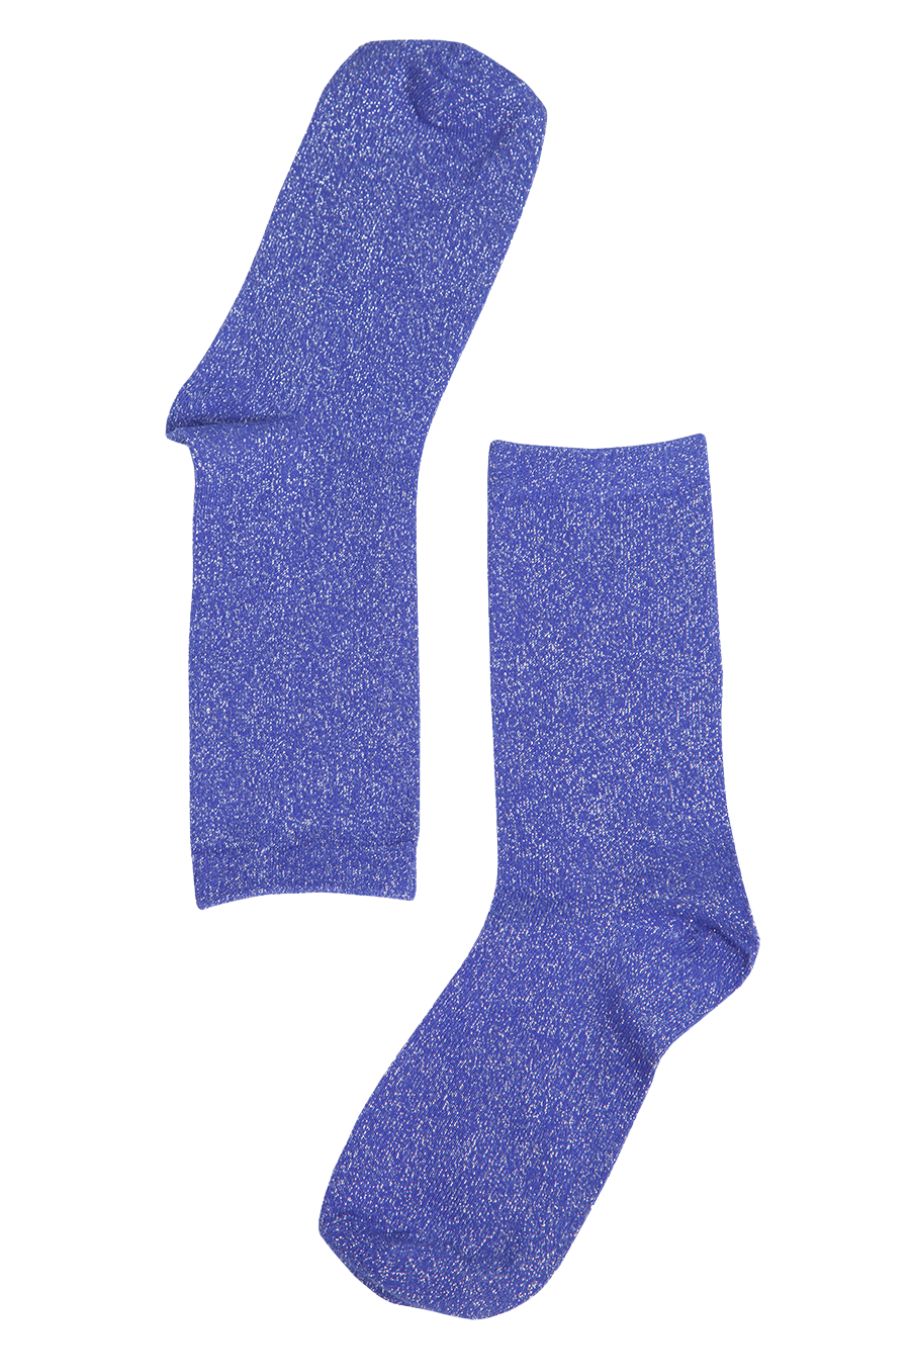 blue and silver sparkly glitter ankle socks